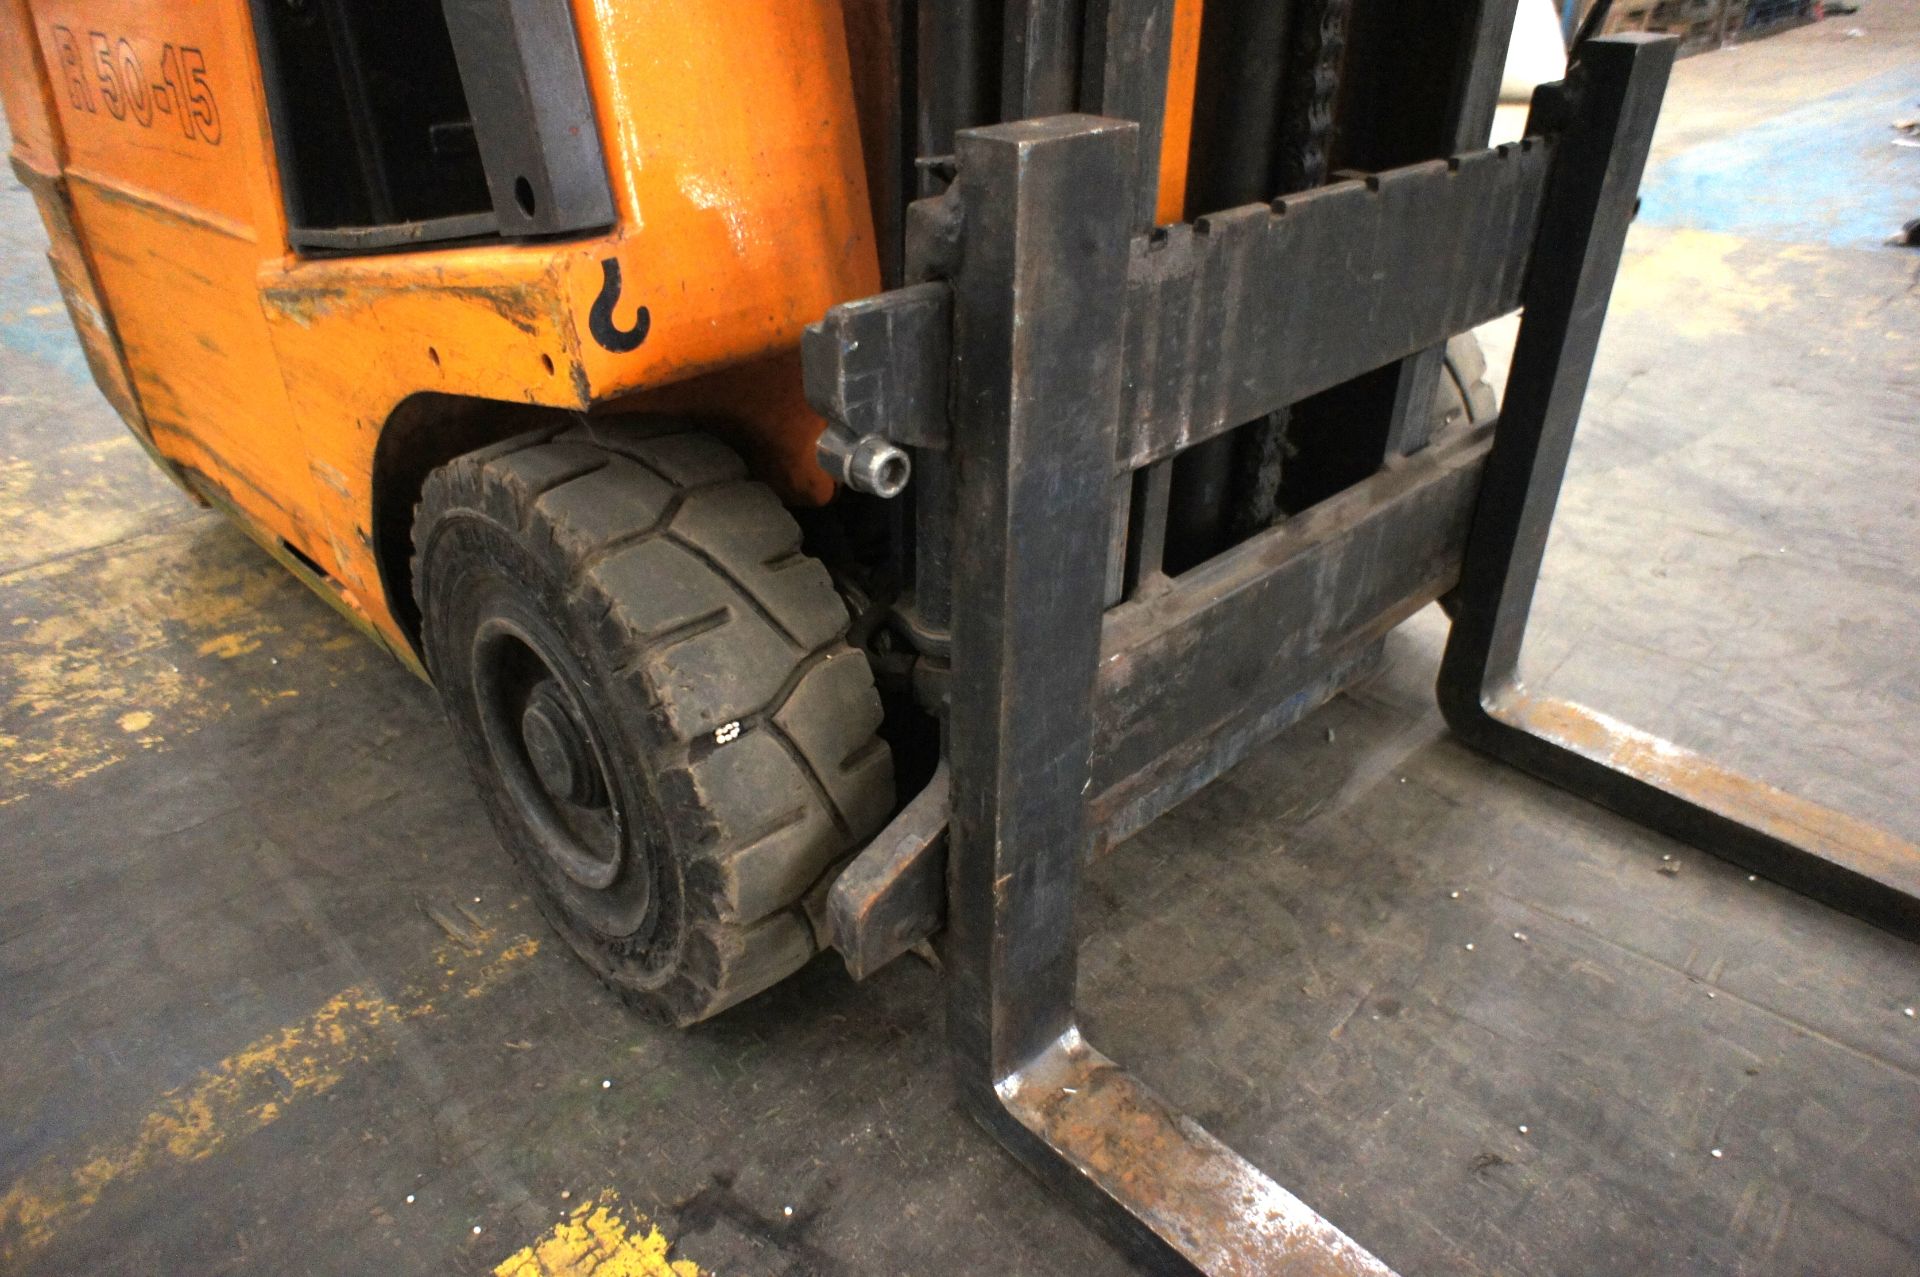 Still R50-15 Forklift, Electric Serial Number 515044020556, Year of Manufacture 2012, Asset No. 556 - Image 7 of 8